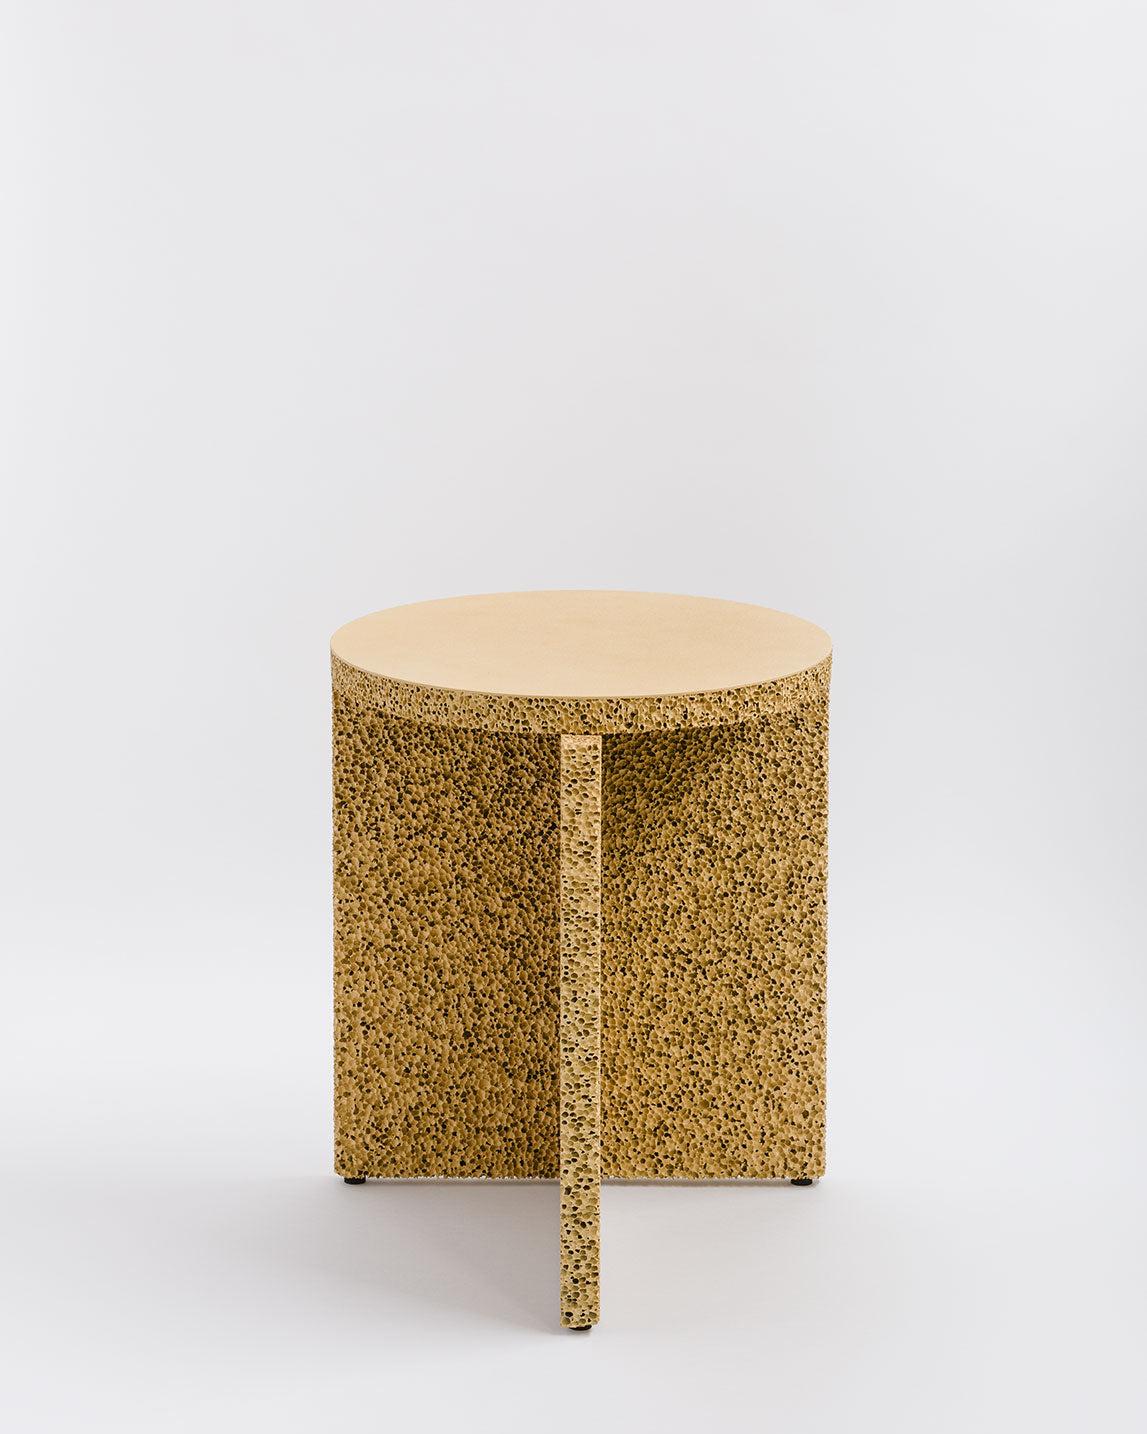 Painted Small Synthetic Kitchen Sponge Table by Calen Knauf